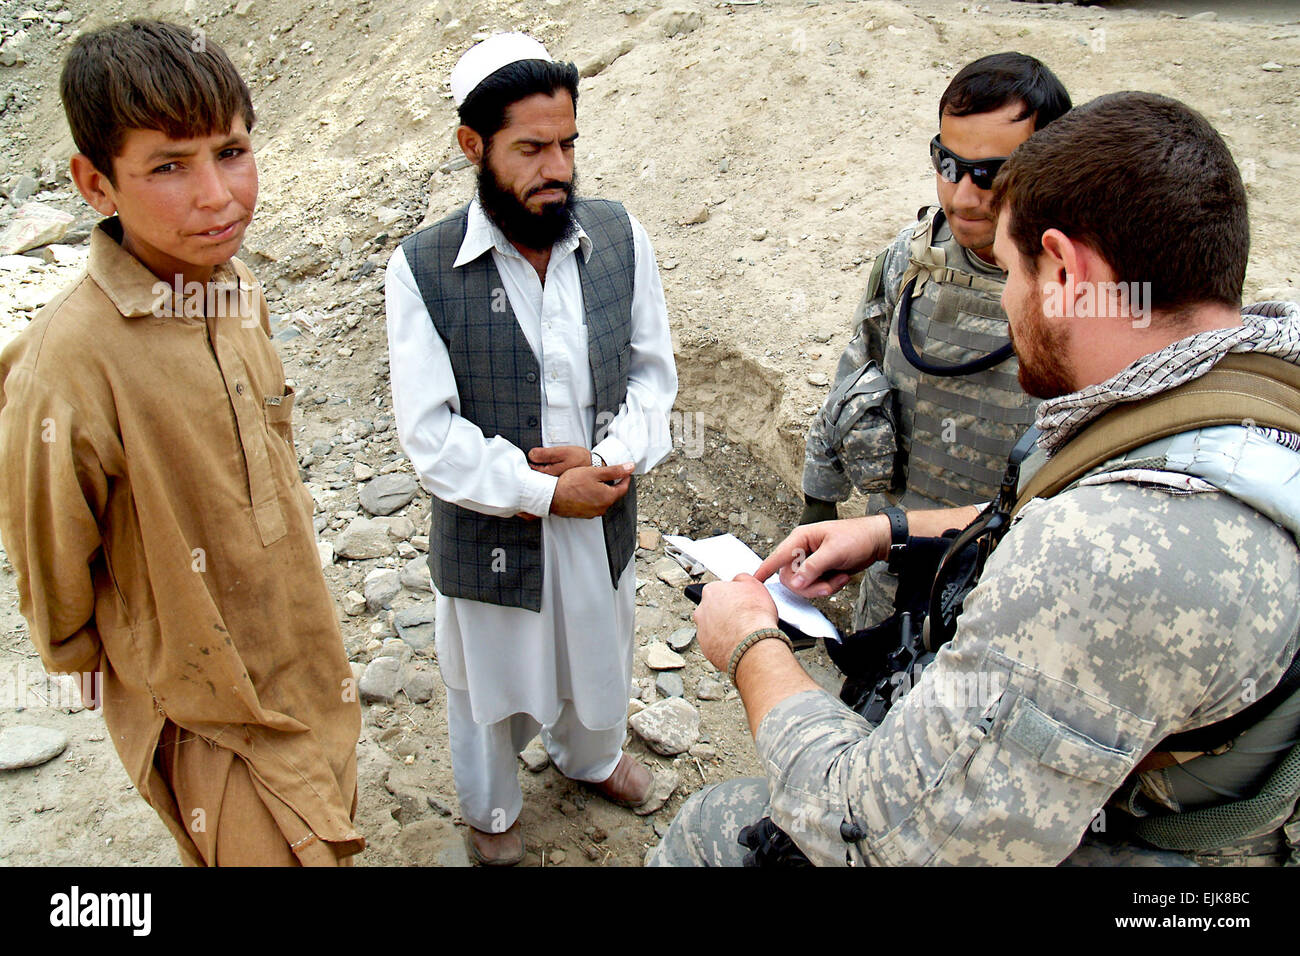 U.S. Army Staff Sgt. Artez Briseno, right, speaks with Mohammad Eqbal,   left center, Gar Sagi village elder, about treatment for Ashqmana Gulab, left, Oct. 29, 2009, in Kunar province, Afghanistan. Ashqmana can't lift his right arm more than six inches because a dislocated shoulder from a fall didn't heal properly. Briseno did an initial   assessment of the boy and gave the elder an authorization slip.  Tech. Sgt. Brian Boisvert Stock Photo